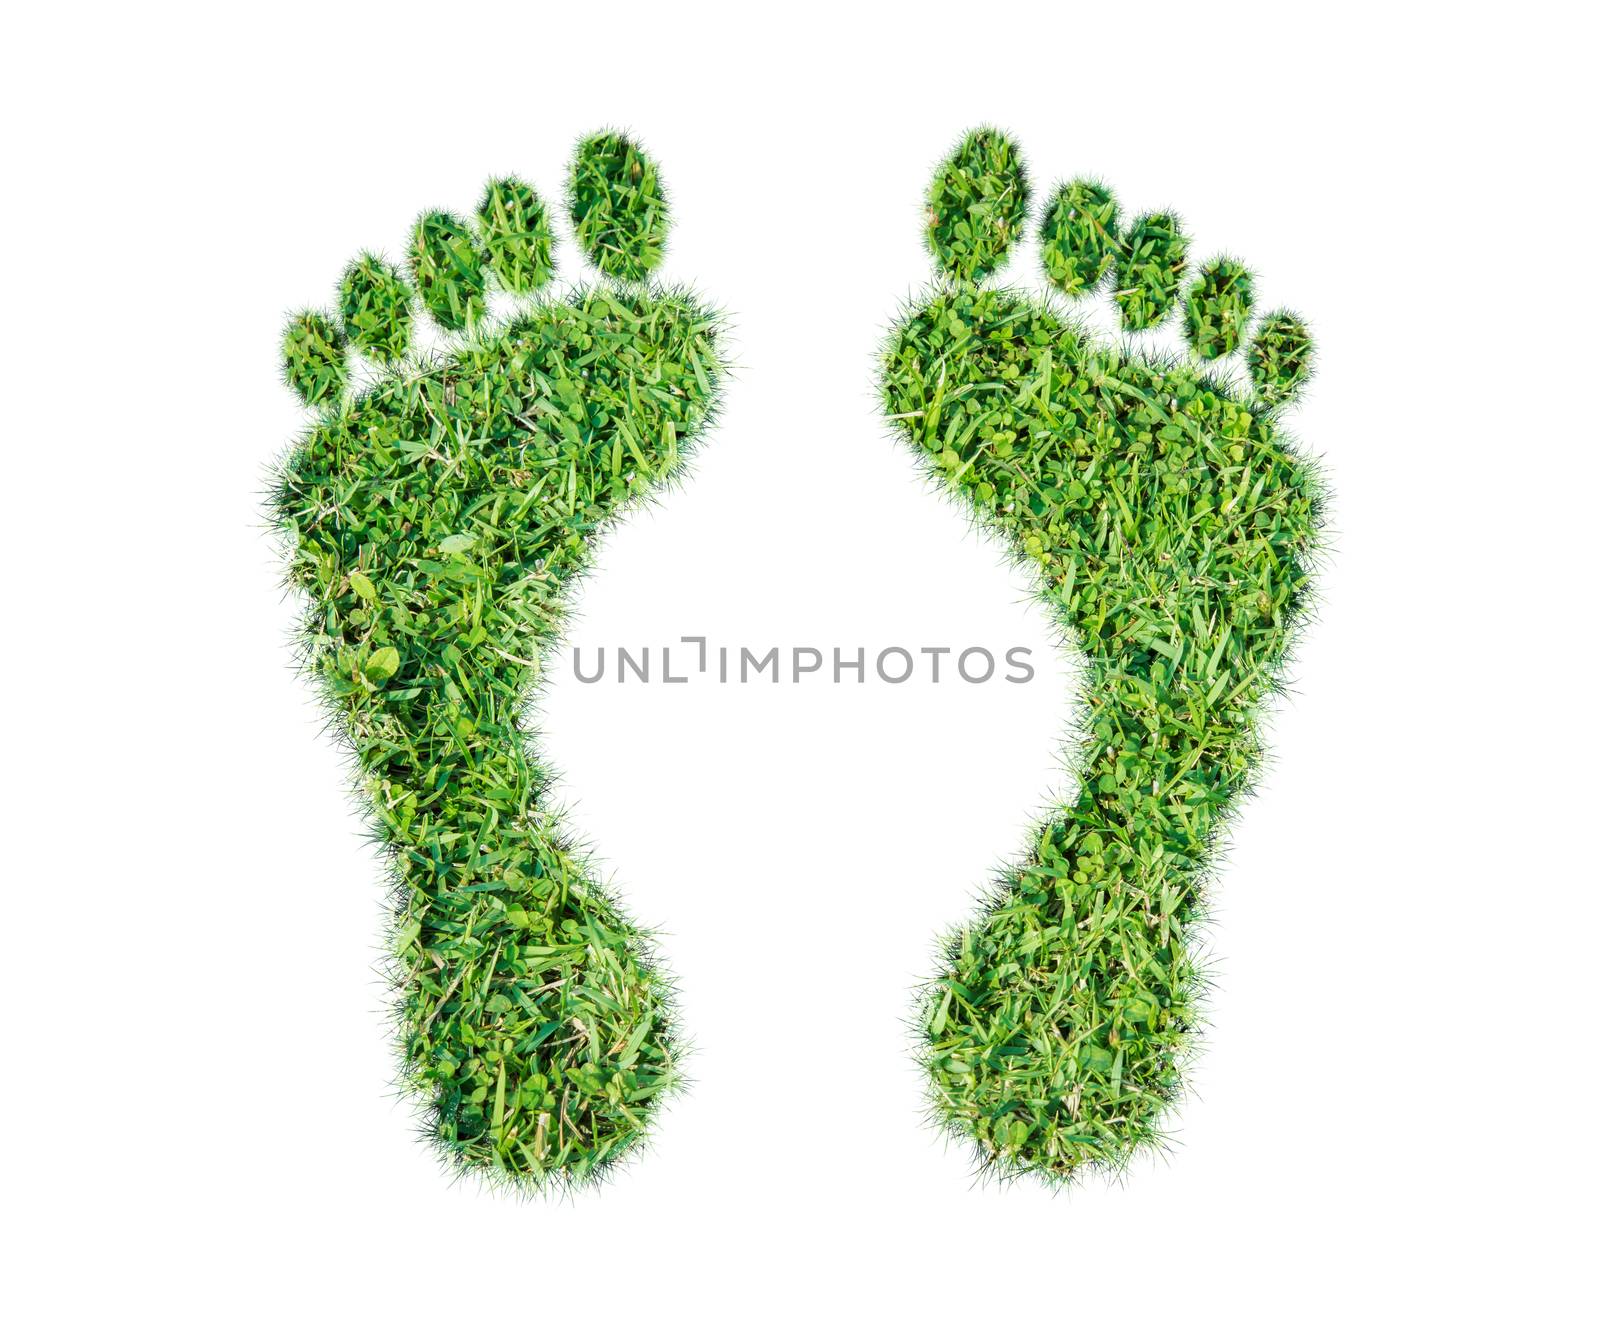 Green grass ecological footprint concept on over white background